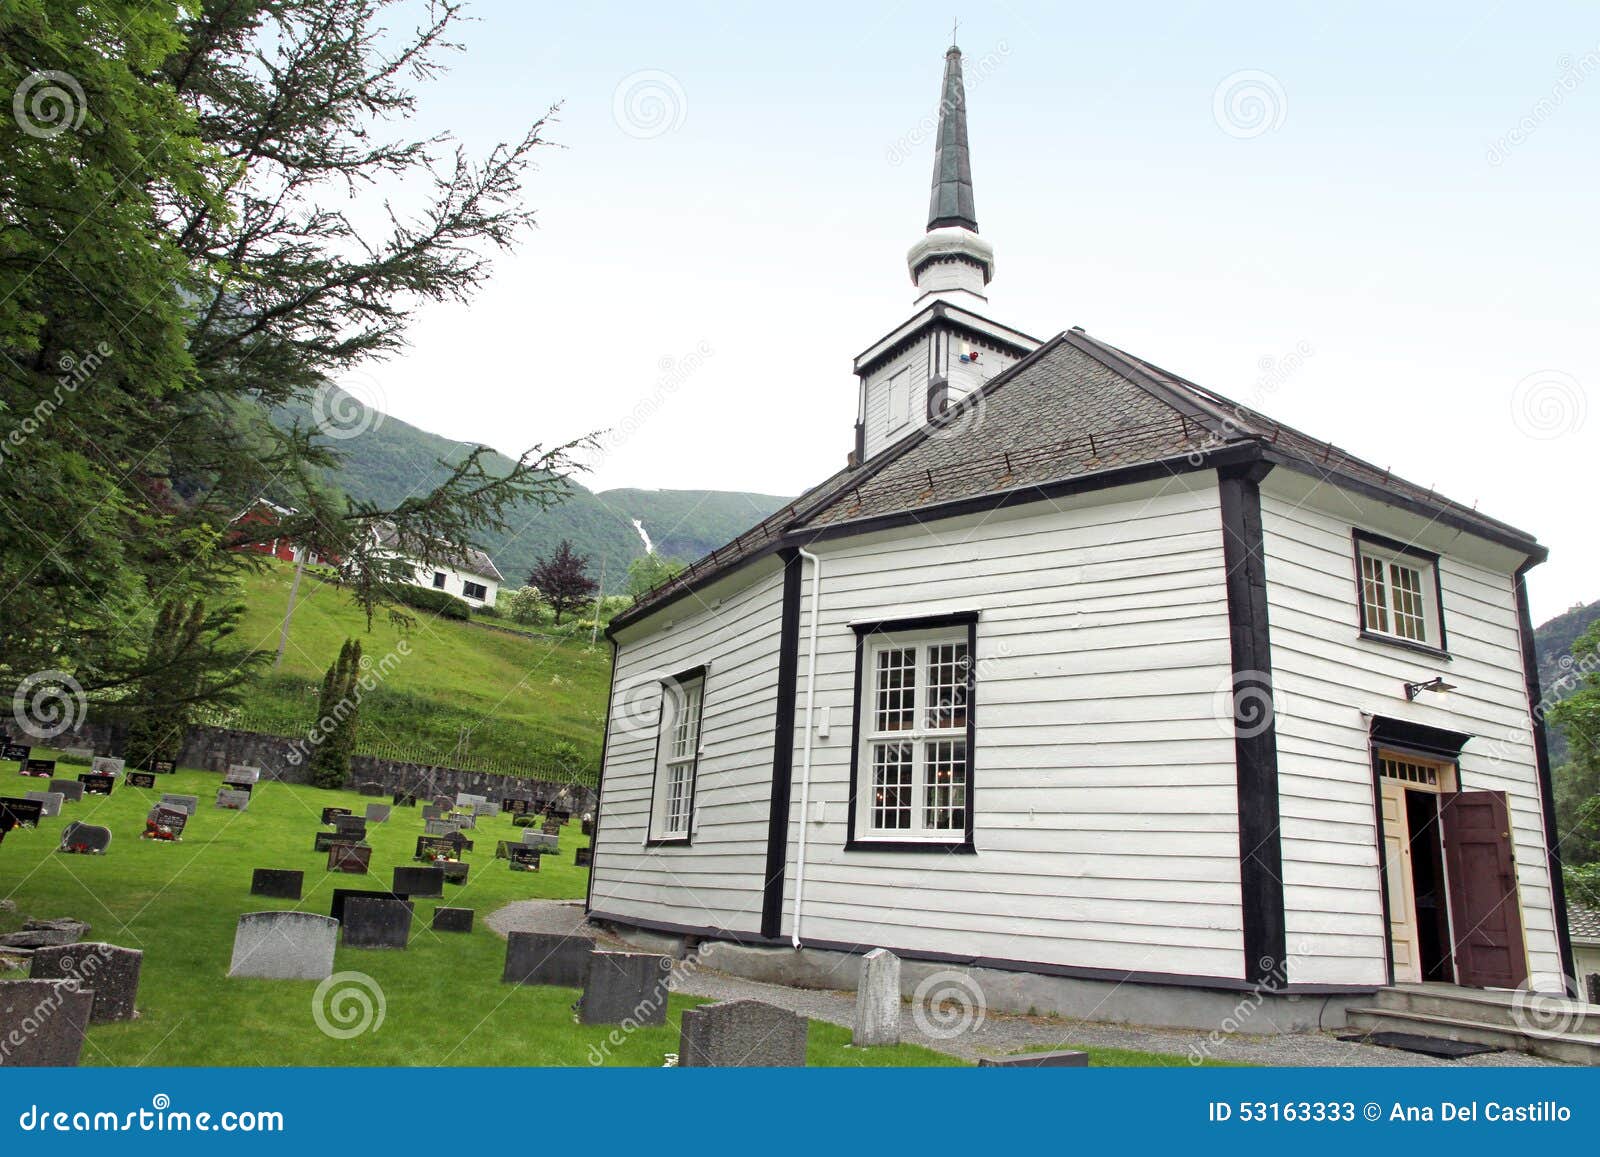 geiranger church and cemeteries norway.